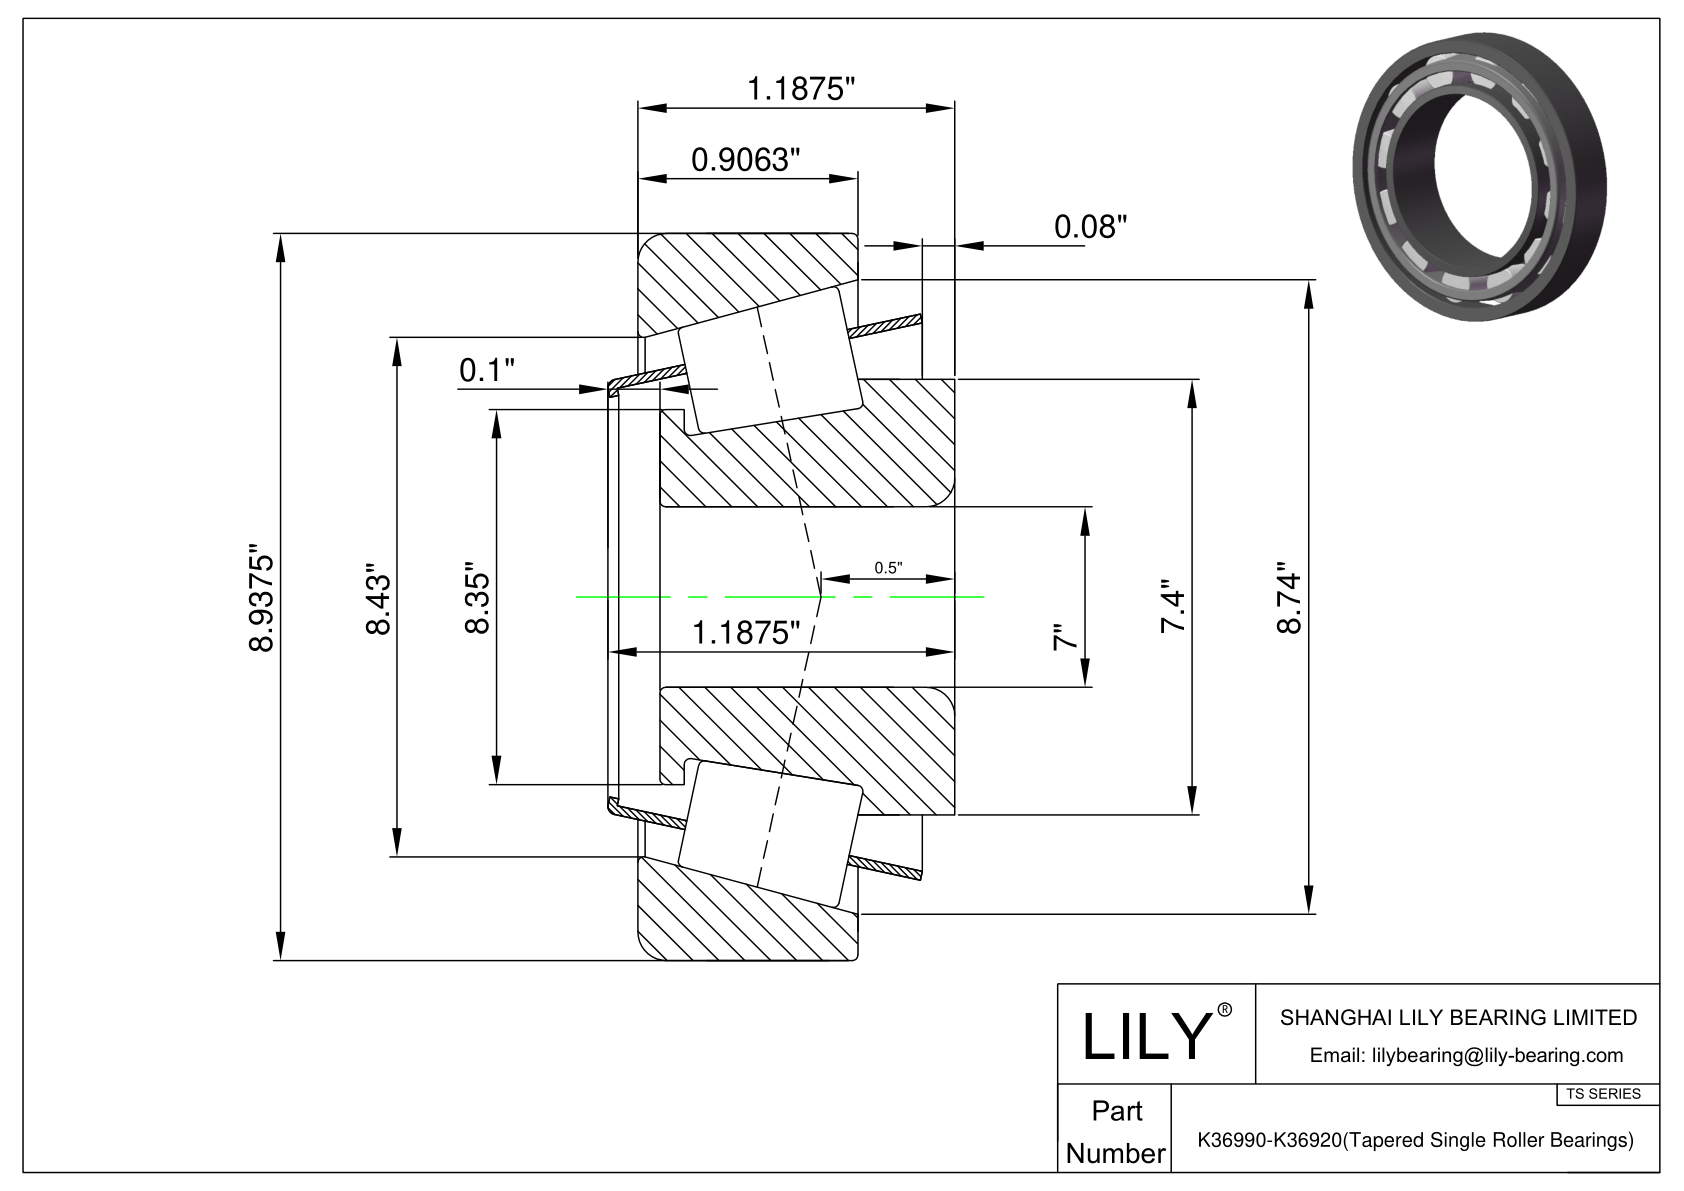 K36990-K36920 TS (Tapered Single Roller Bearings) (Imperial) cad drawing